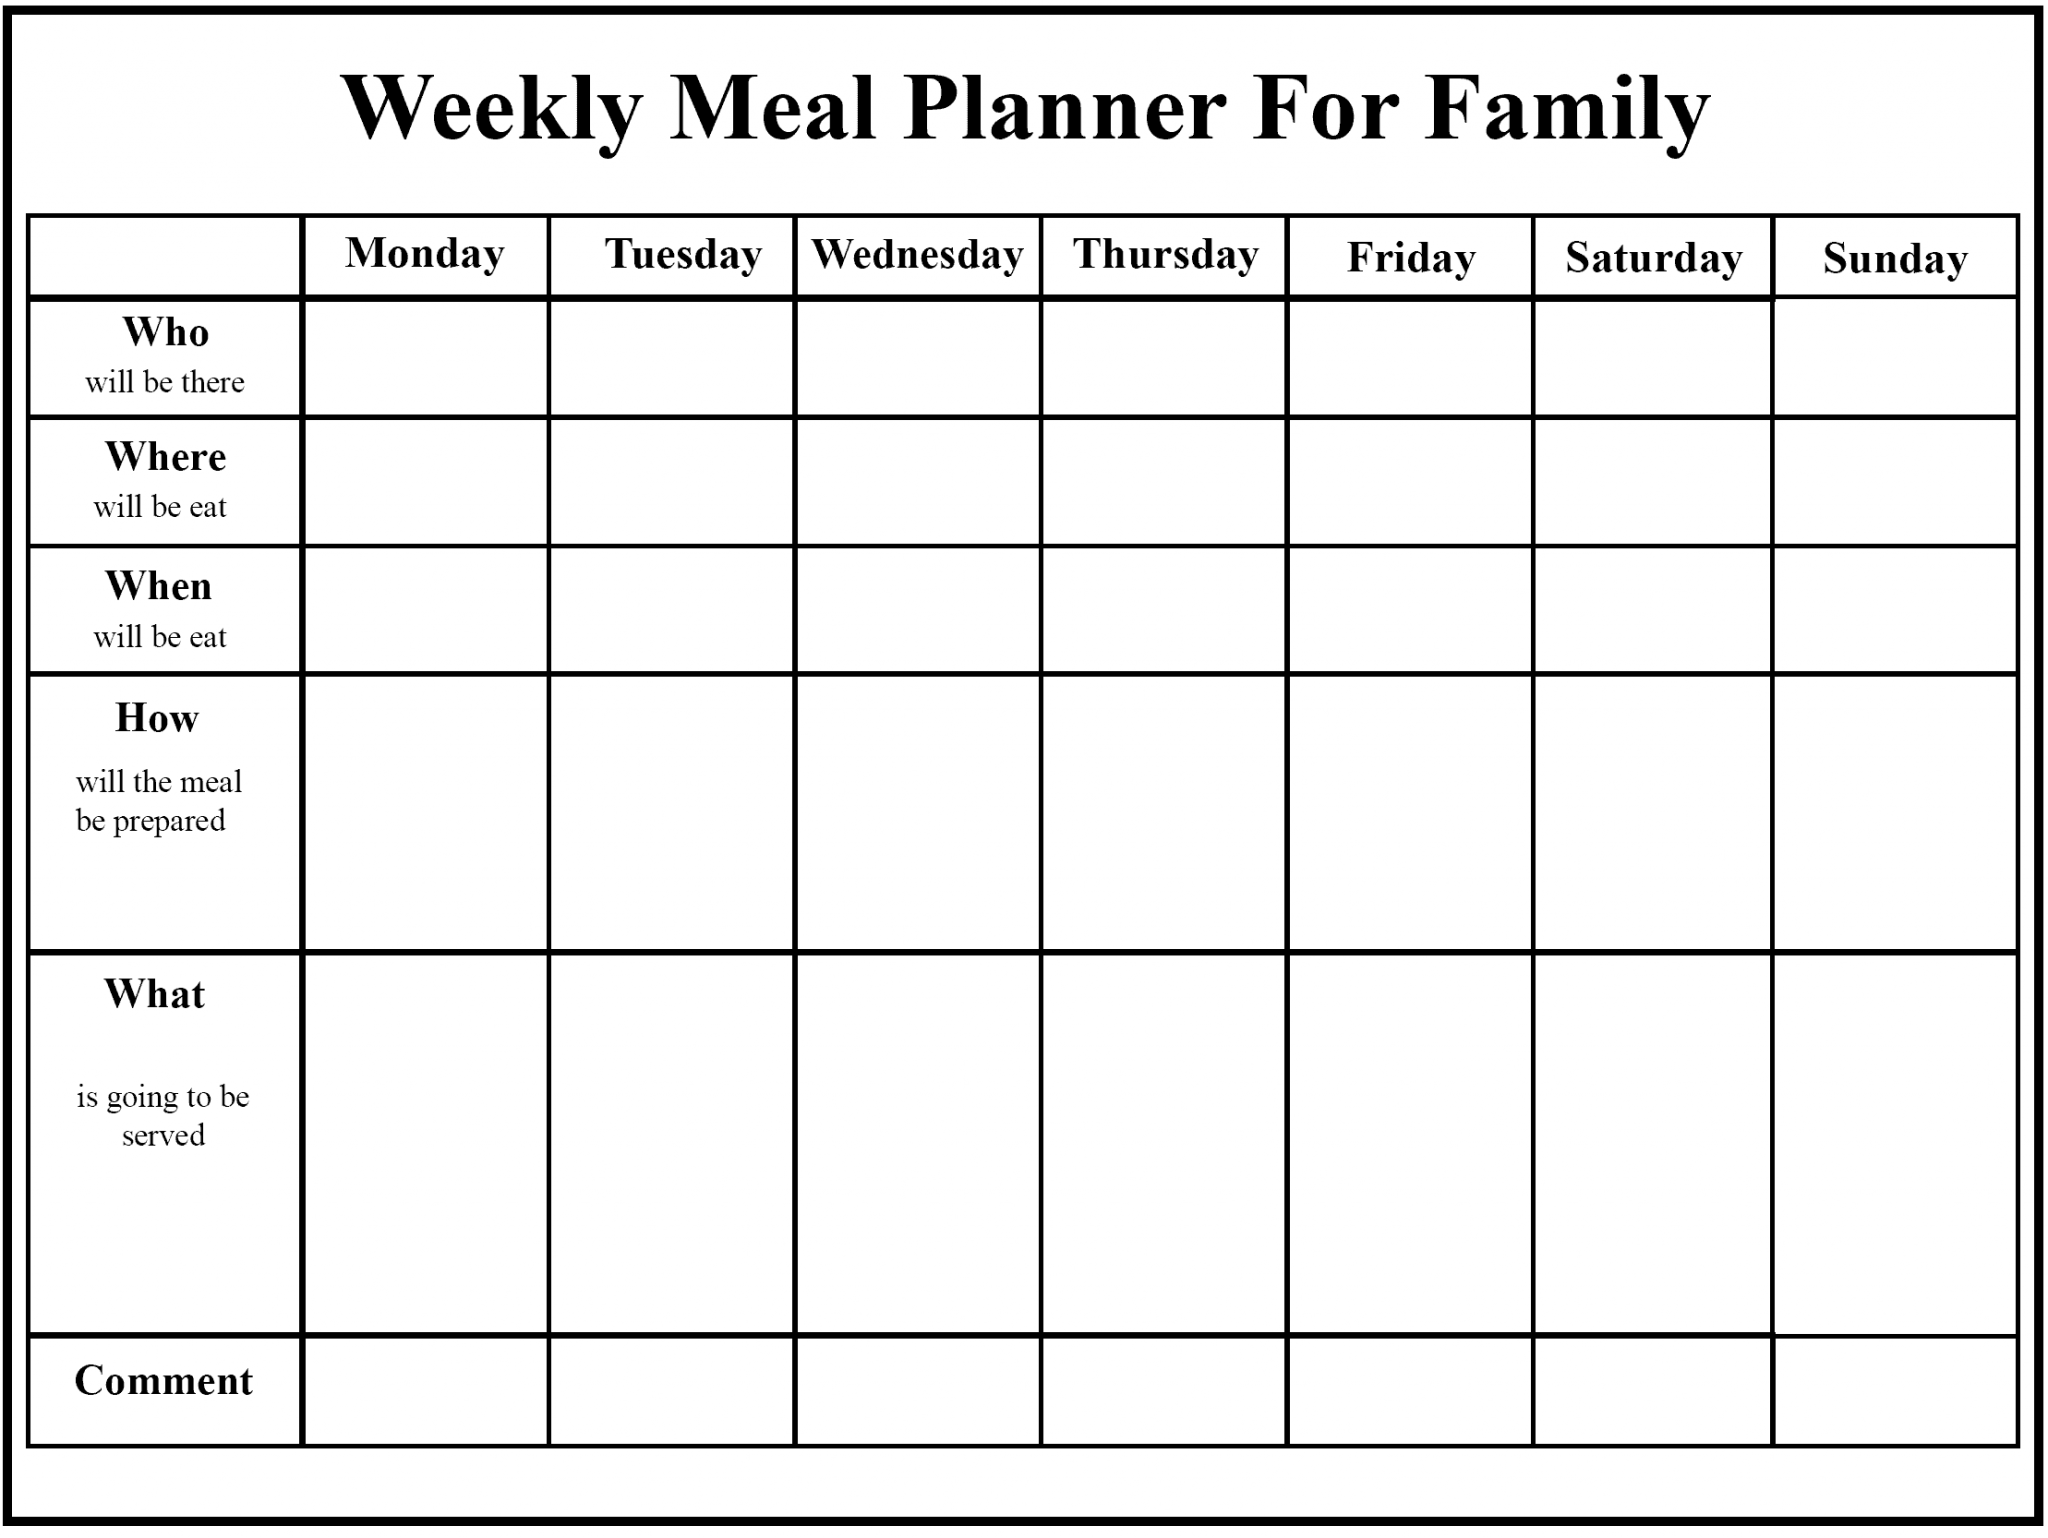 Weekly Meal Planner For Family Templates How To Wiki HowToWiki